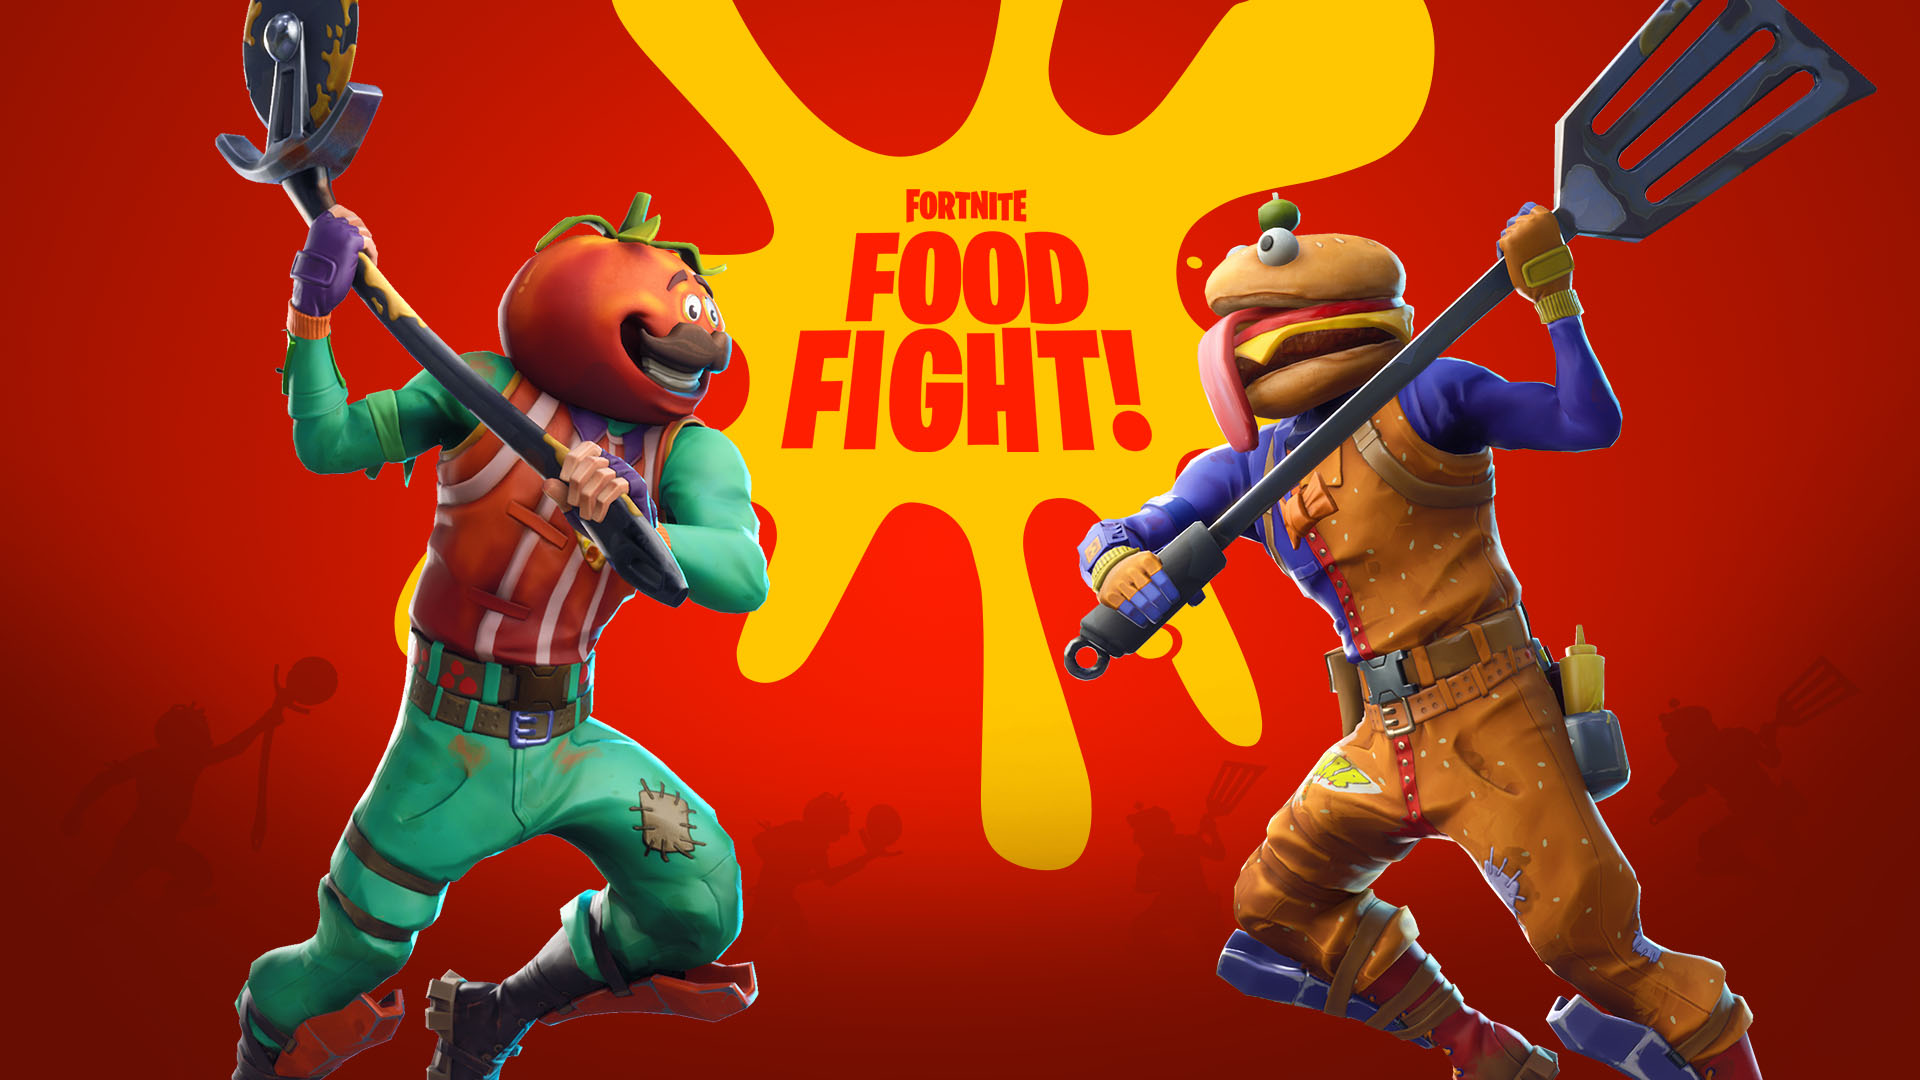 fortnite s food fight ltm receives adjustments to help players feel like they re making more progress - fortnite